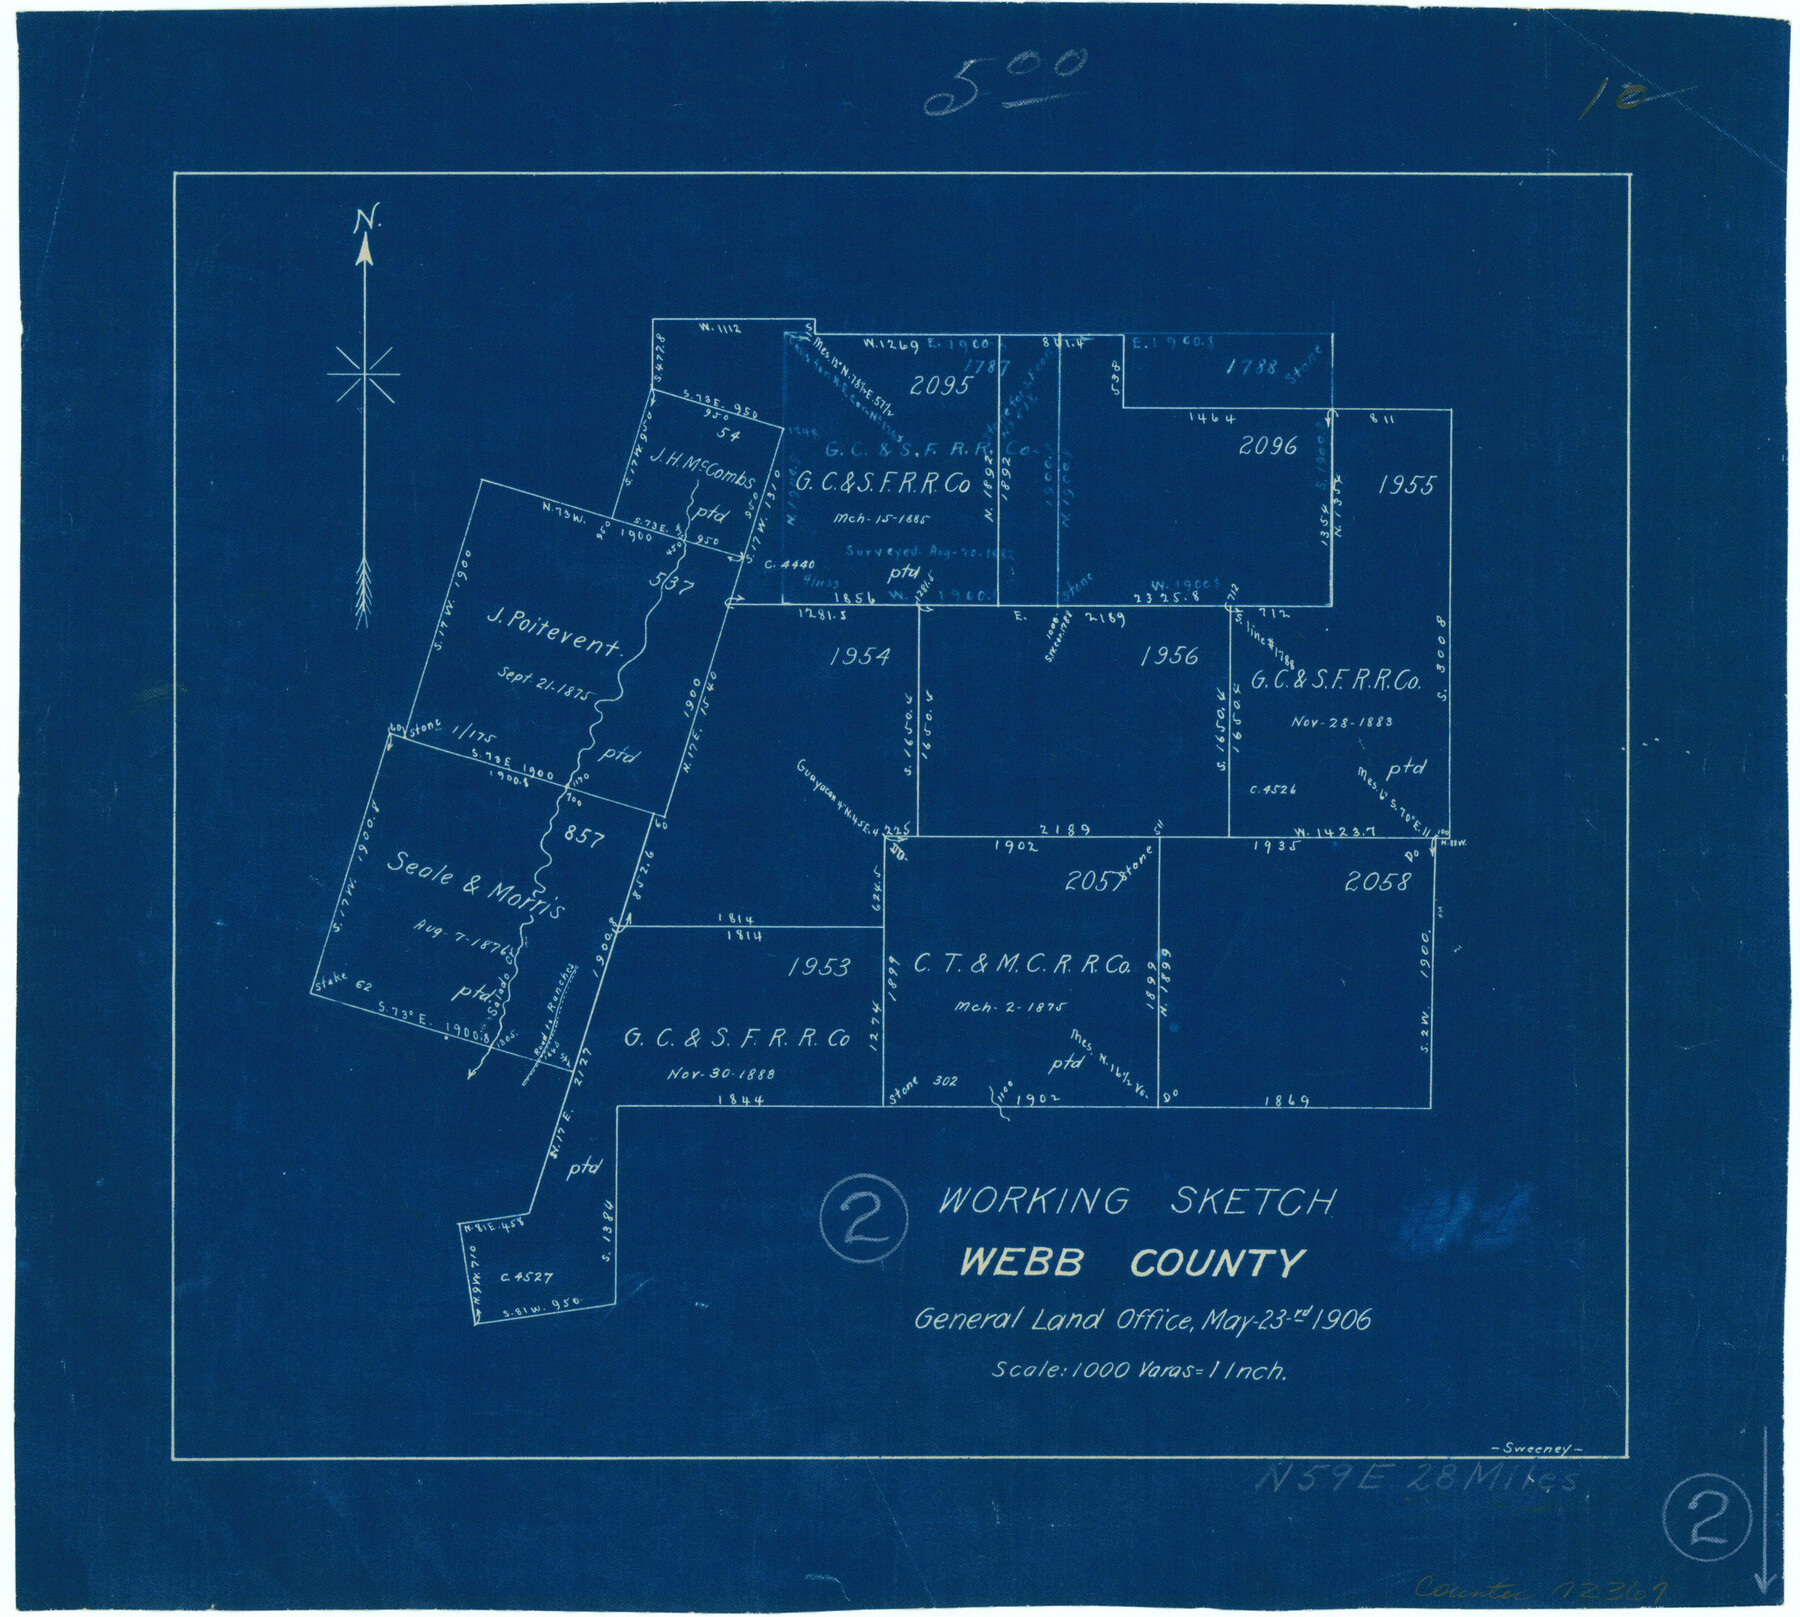 72367, Webb County Working Sketch 2, General Map Collection